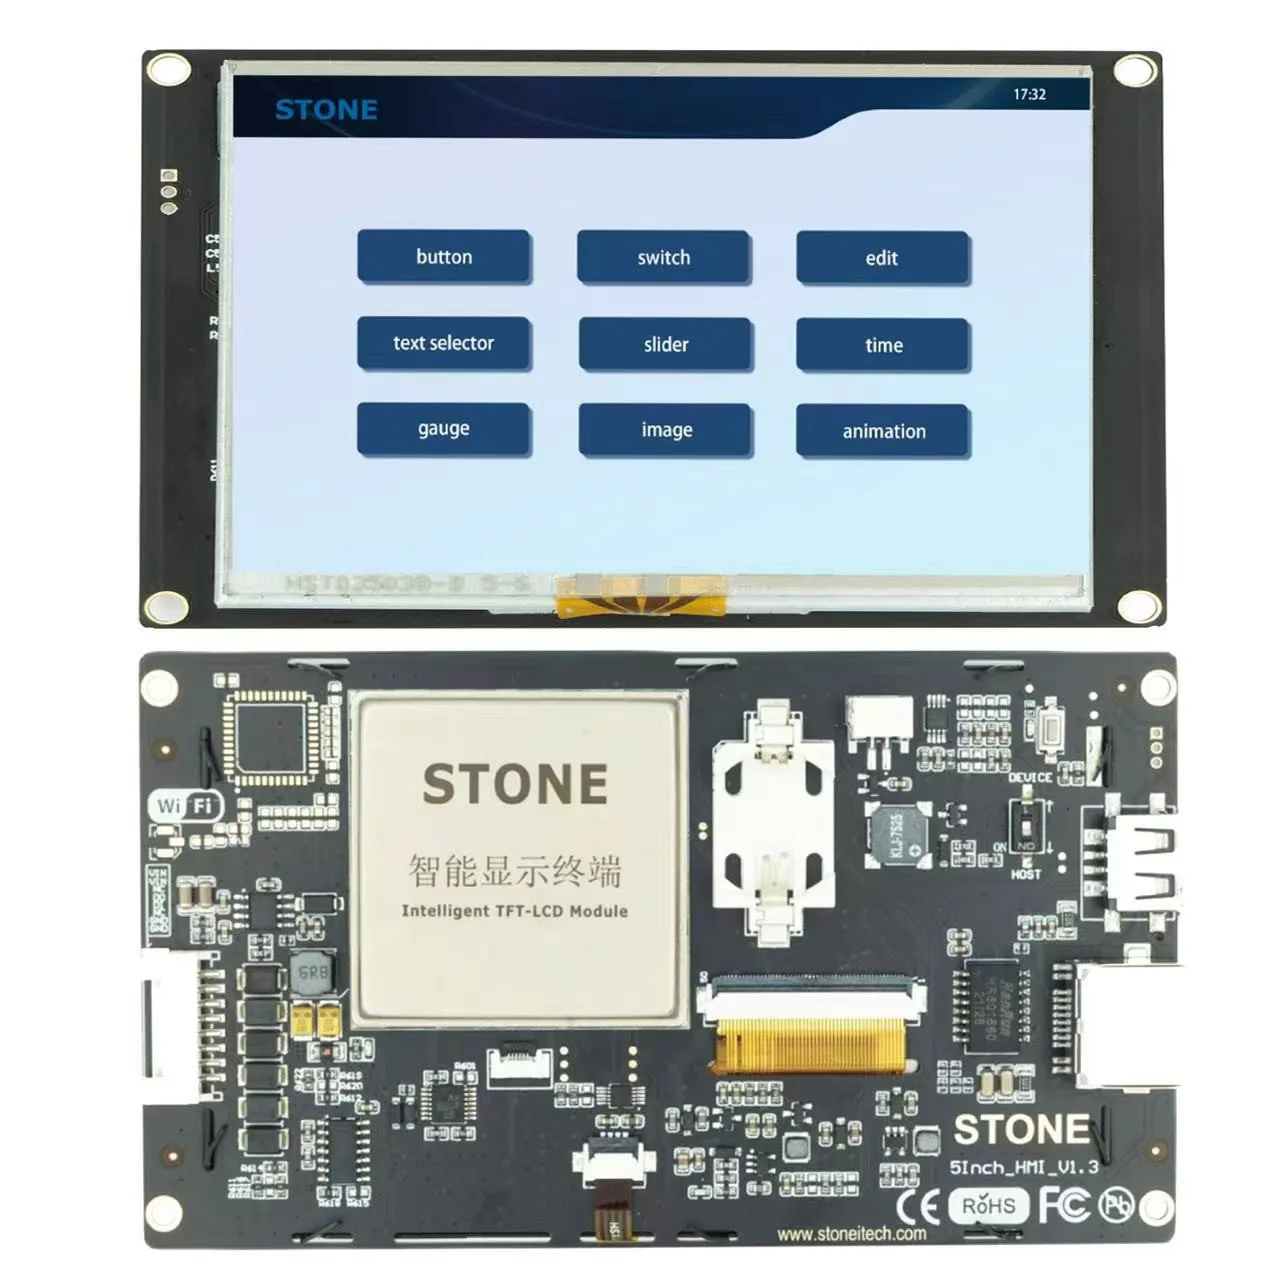 SCBRHMI I Series - 5'' HMI Intelligent Resistive Touch Display TFT LCD Full-color Module Support STONE Editor